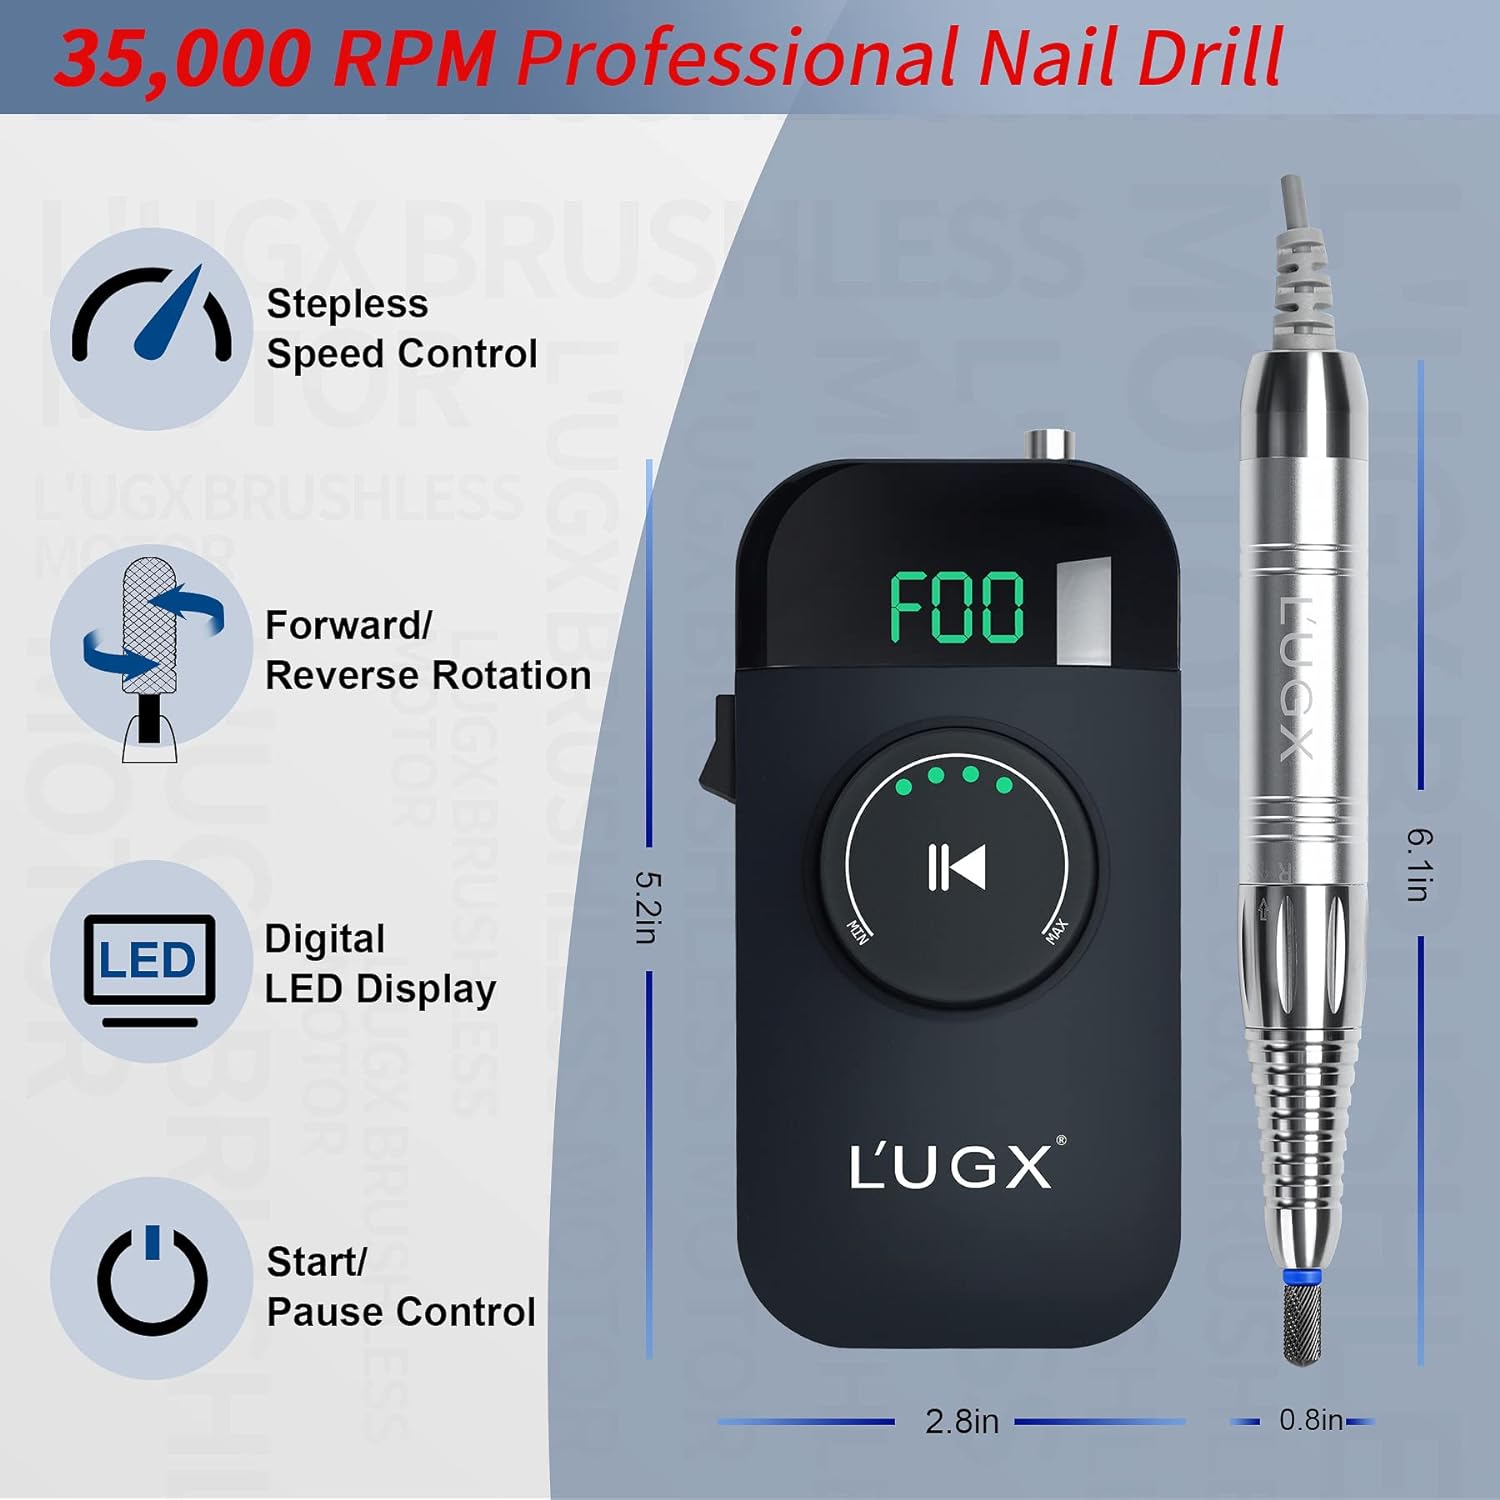 LUGX Brushless E-File/Nail Drill with handpiece stand & premium LUGX drill bit